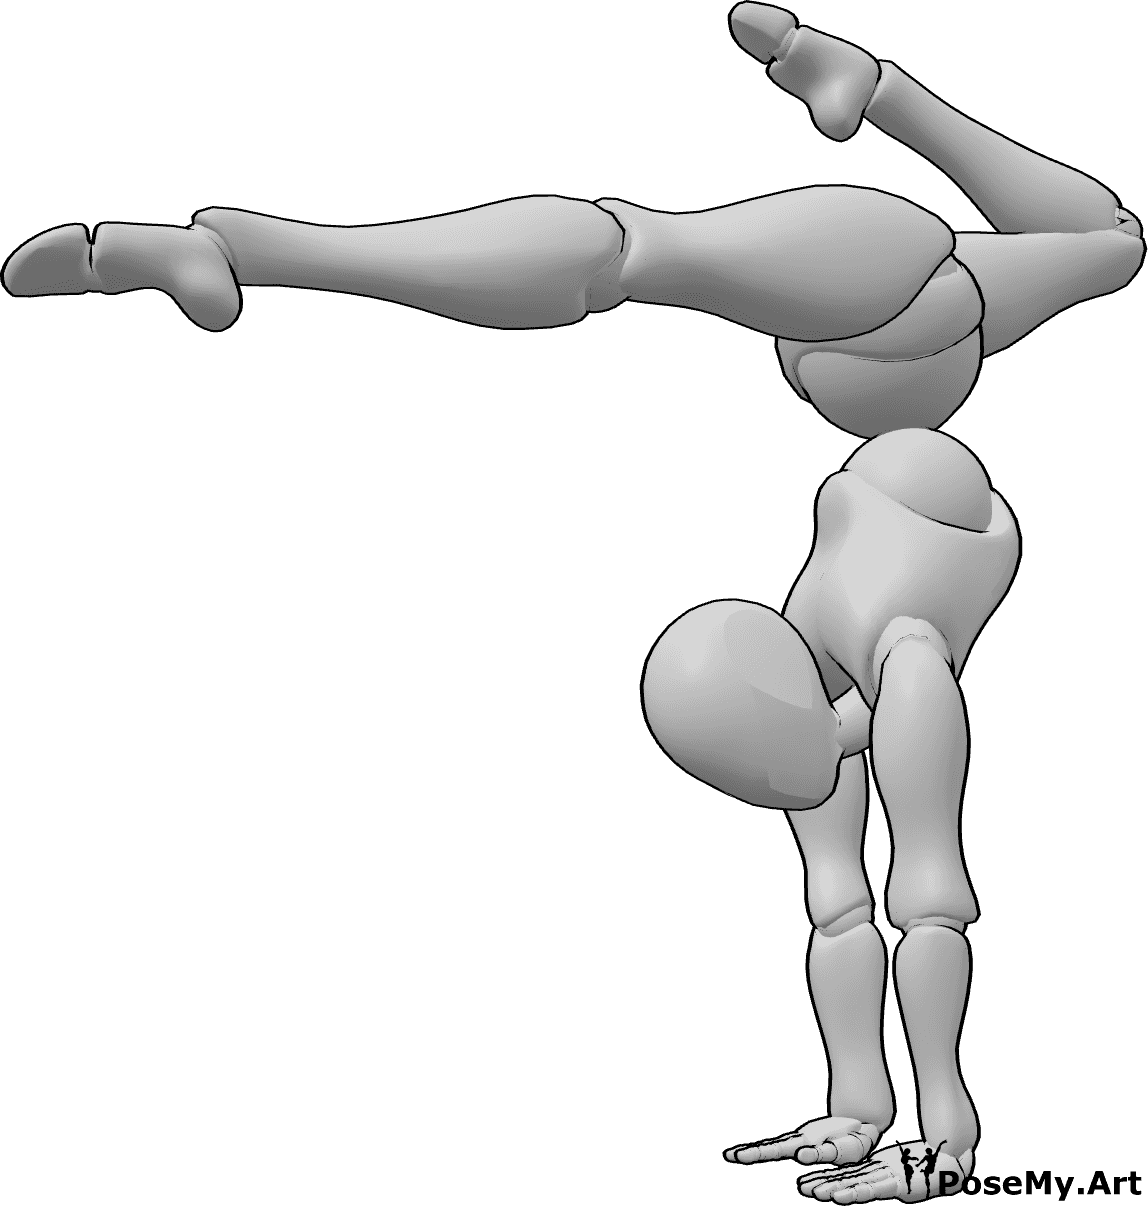 Pose Reference - Acrobatic handstanding pose - Female is performing an acrobatic handstanding pose